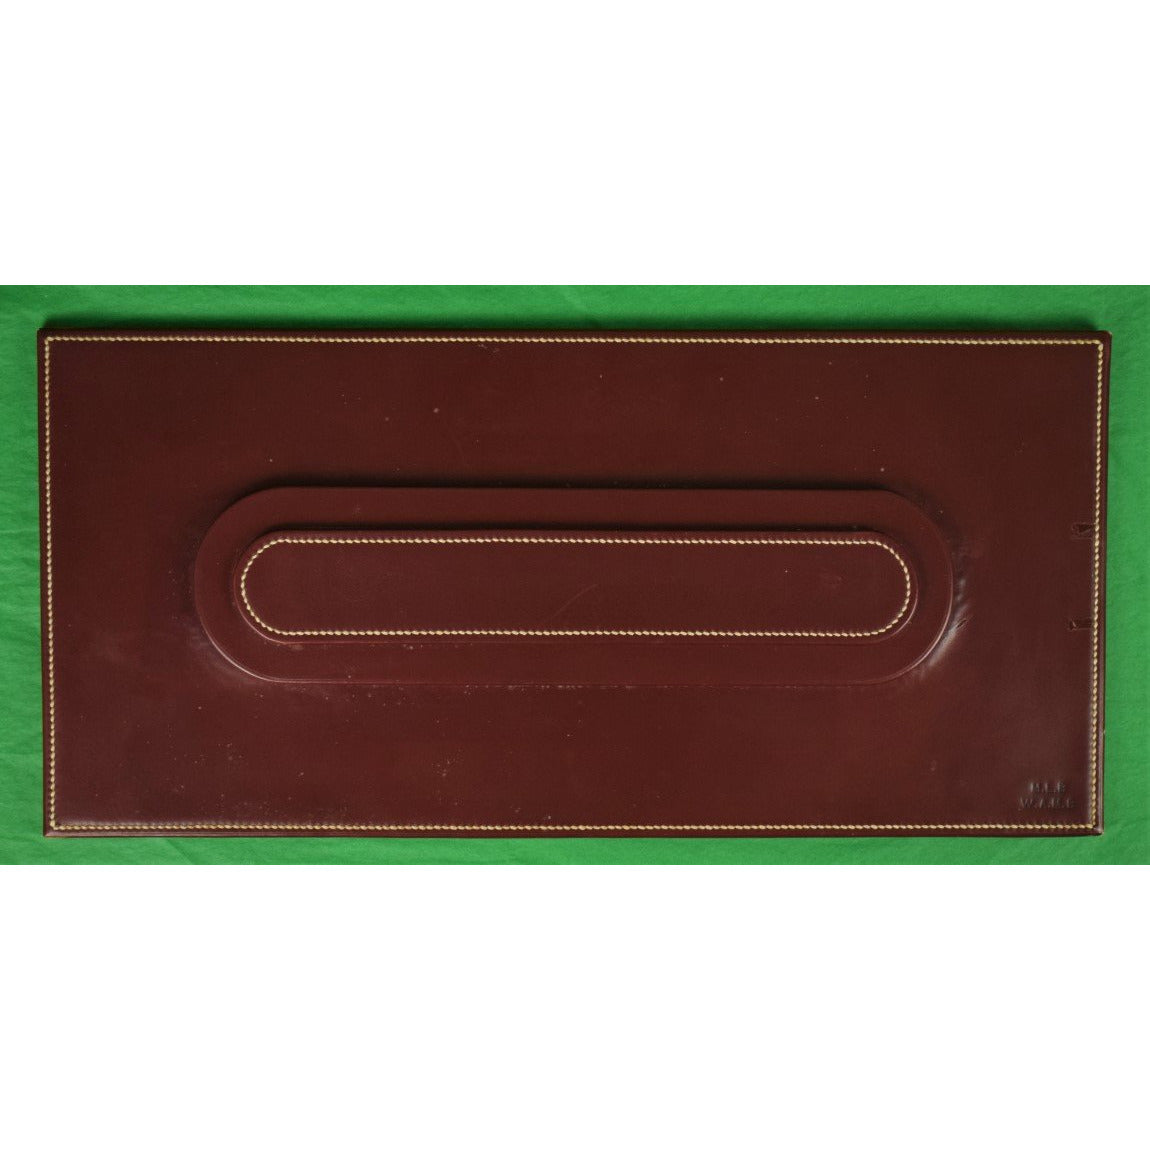 Ultra-Rare Hermes Burgundy Leather Dinner Placecard Setting Tray